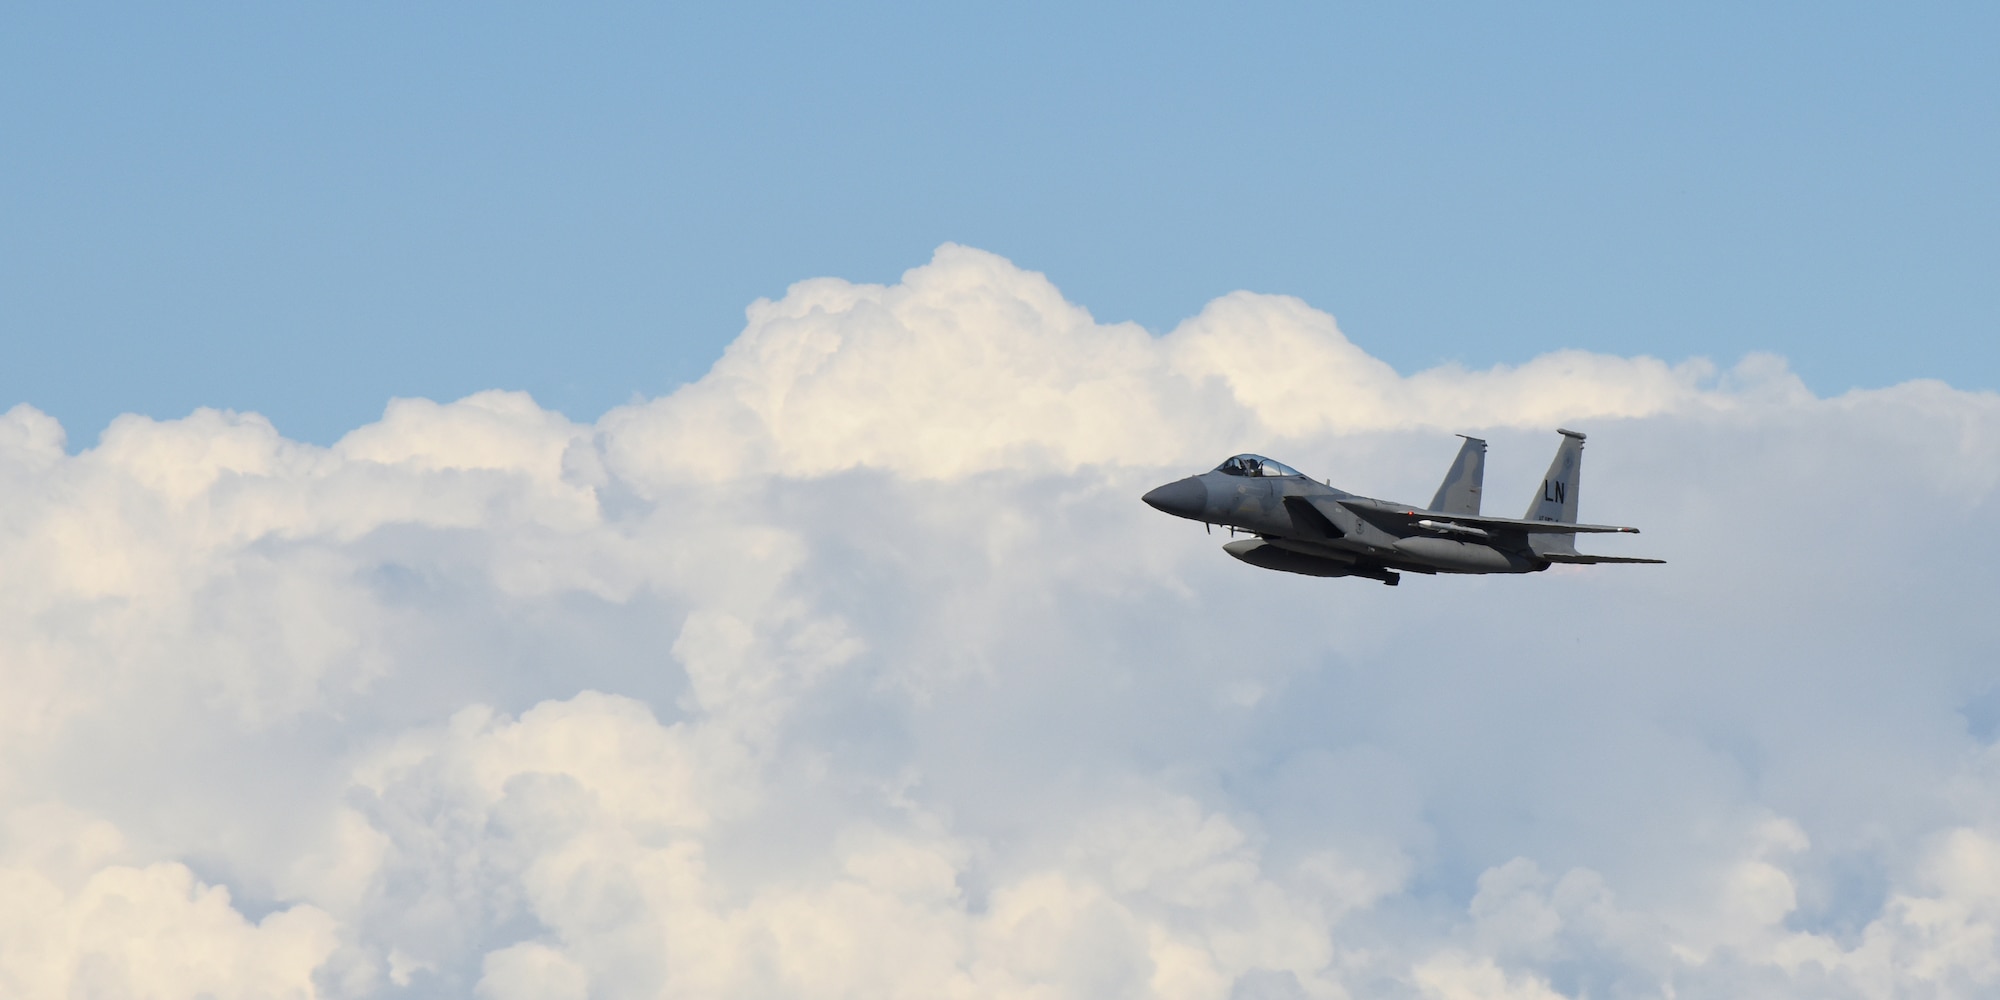 An F-15C Eagle assigned to the 493rd Expeditionary Fighter Squadron takes flight over Keflavik Air Base, Iceland, Aug. 2, 2018, as part of a training mission. While providing critical infrastructure and support, Iceland has looked to its NATO allies to provide airborne surveillance and interception capabilities to meet its peacetime preparedness needs since 2008. (U.S. Air Force photo/Staff Sgt. Alex Fox Echols III)